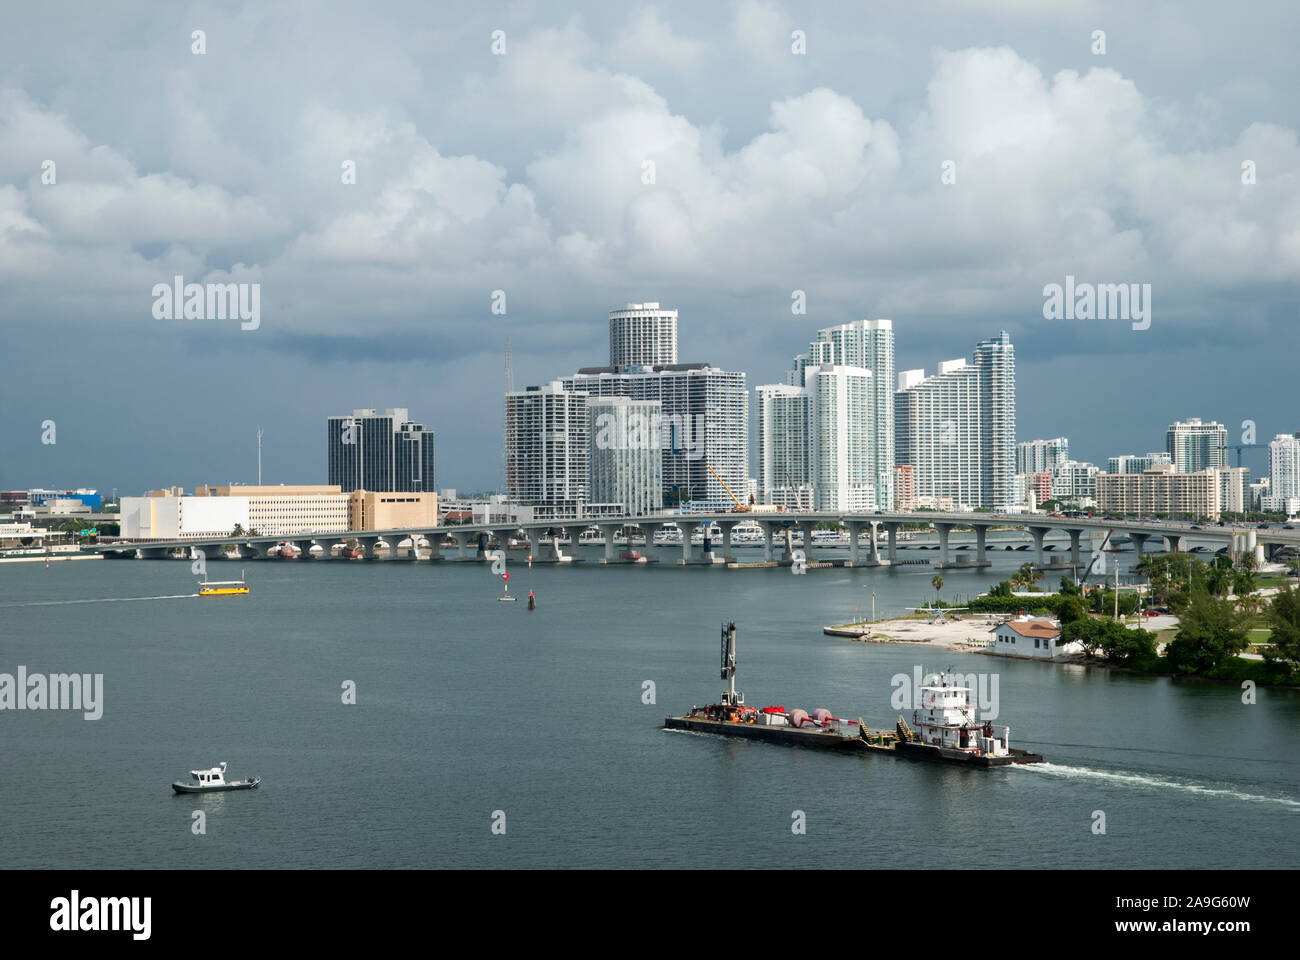 The busy Miami Main Channel water traffic under rainy clouds (Florida). Stock Photo